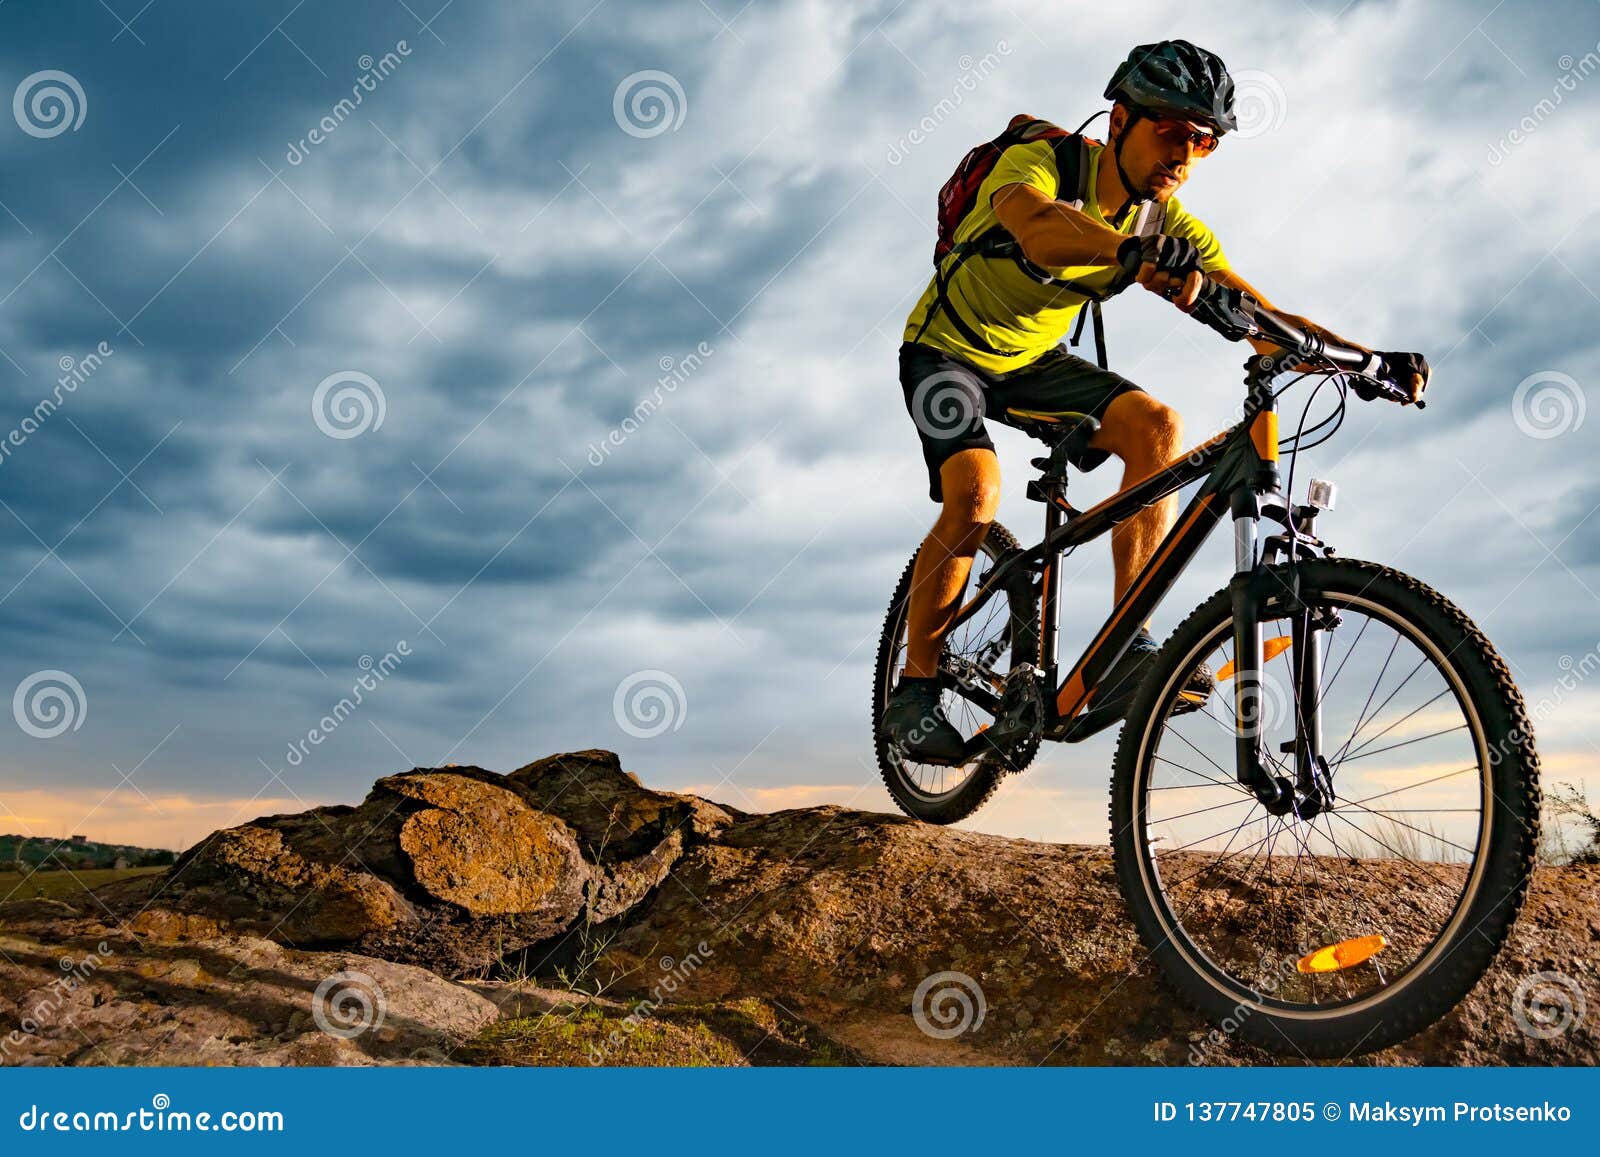 cyclist riding the mountain bike on rocky trail at sunset. extreme sport and enduro biking concept.